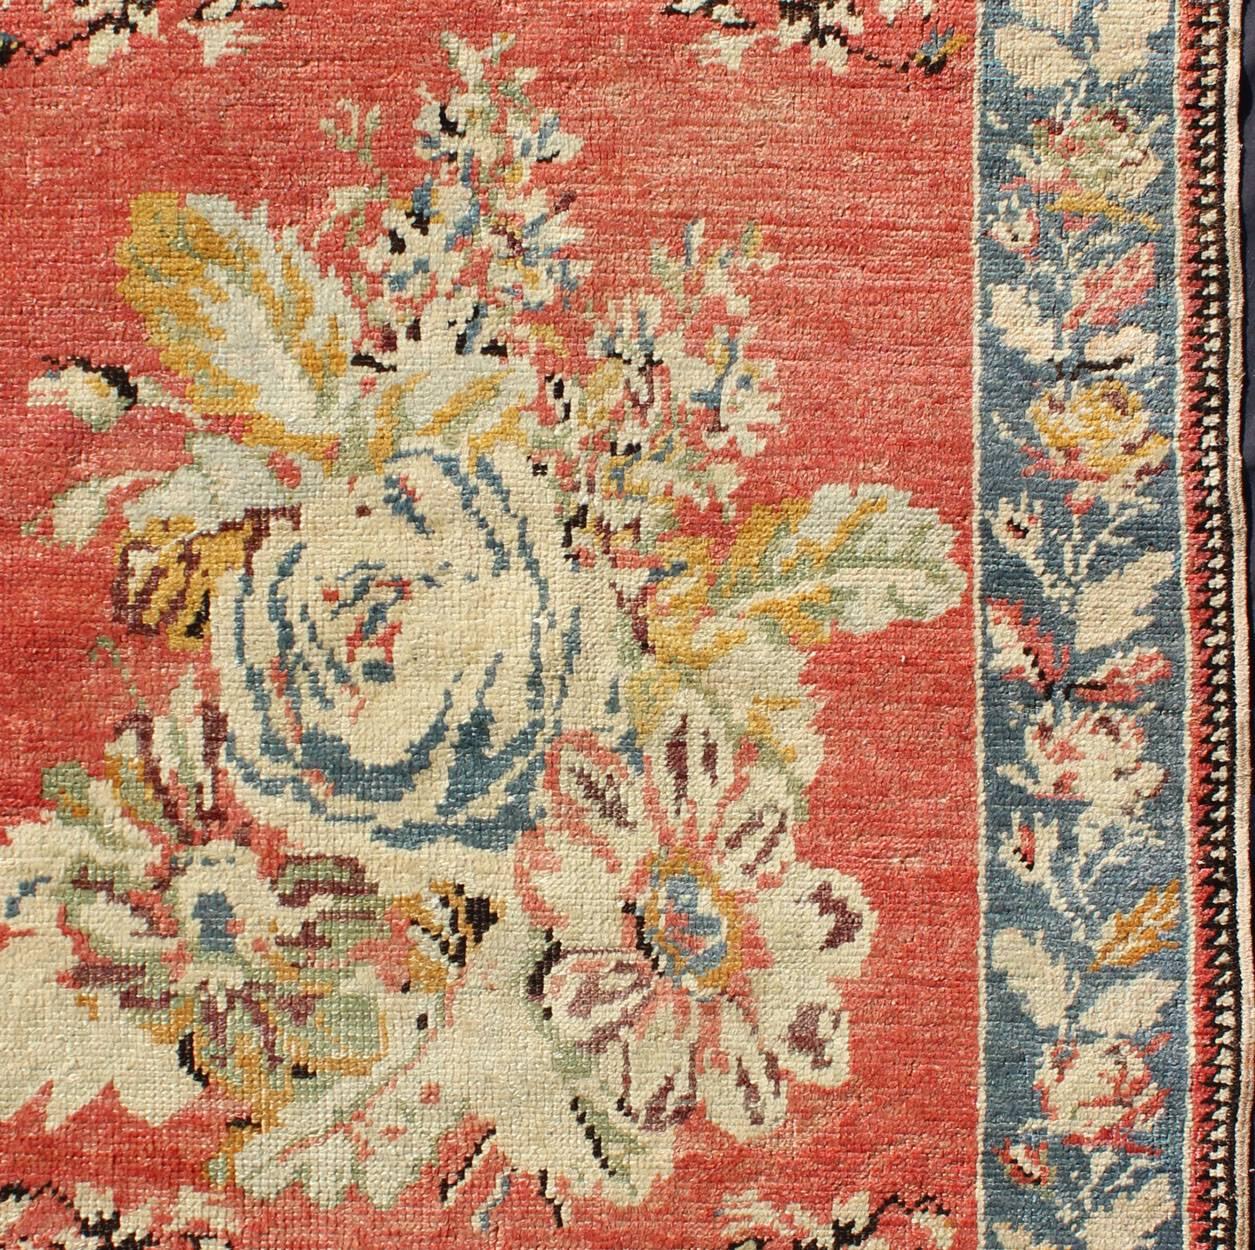 Vintage Turkish Oushak Carpet with Bouquets of Colorful Flowers in Red and Teal In Excellent Condition For Sale In Atlanta, GA